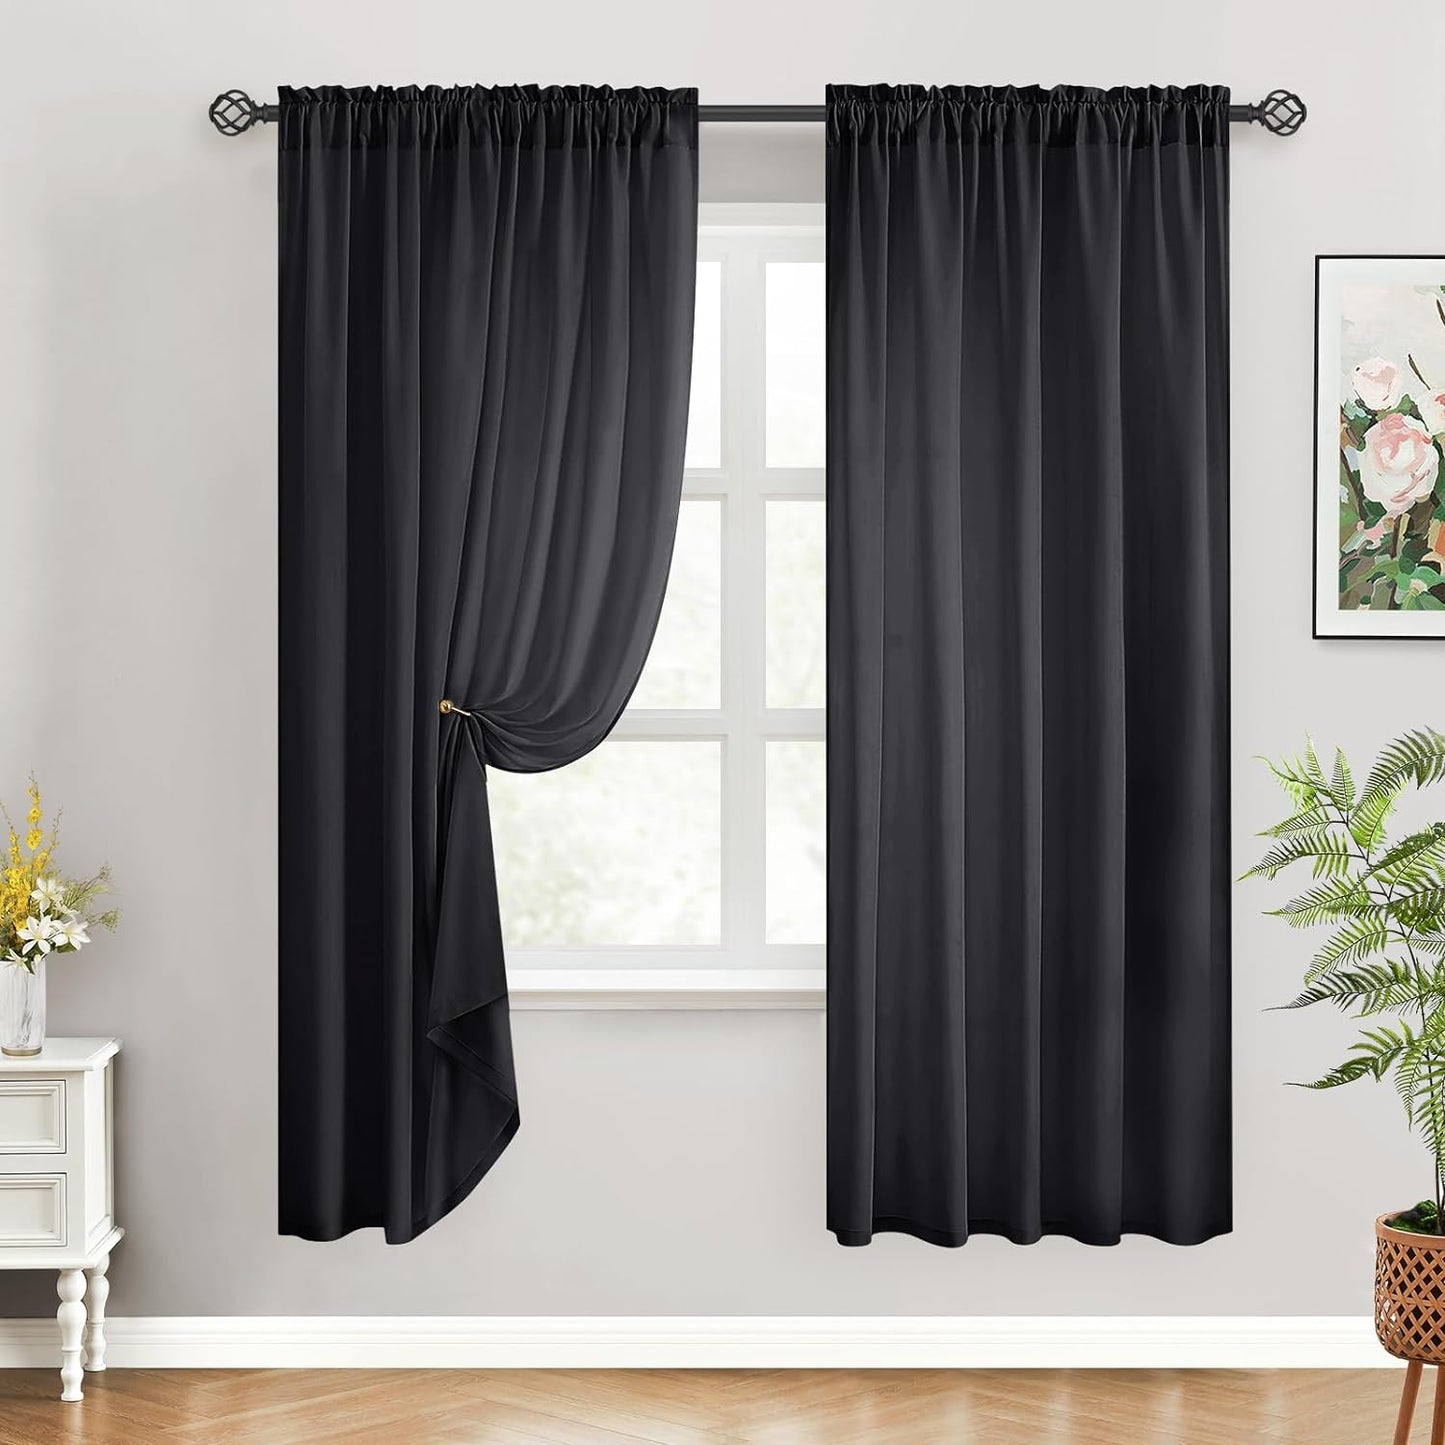 HOMEIDEAS Non-See-Through White Privacy Sheer Curtains 52 X 84 Inches Long 2 Panels Semi Sheer Curtains Light Filtering Window Curtains Drapes for Bedroom Living Room  HOMEIDEAS Black W52" X L72" 